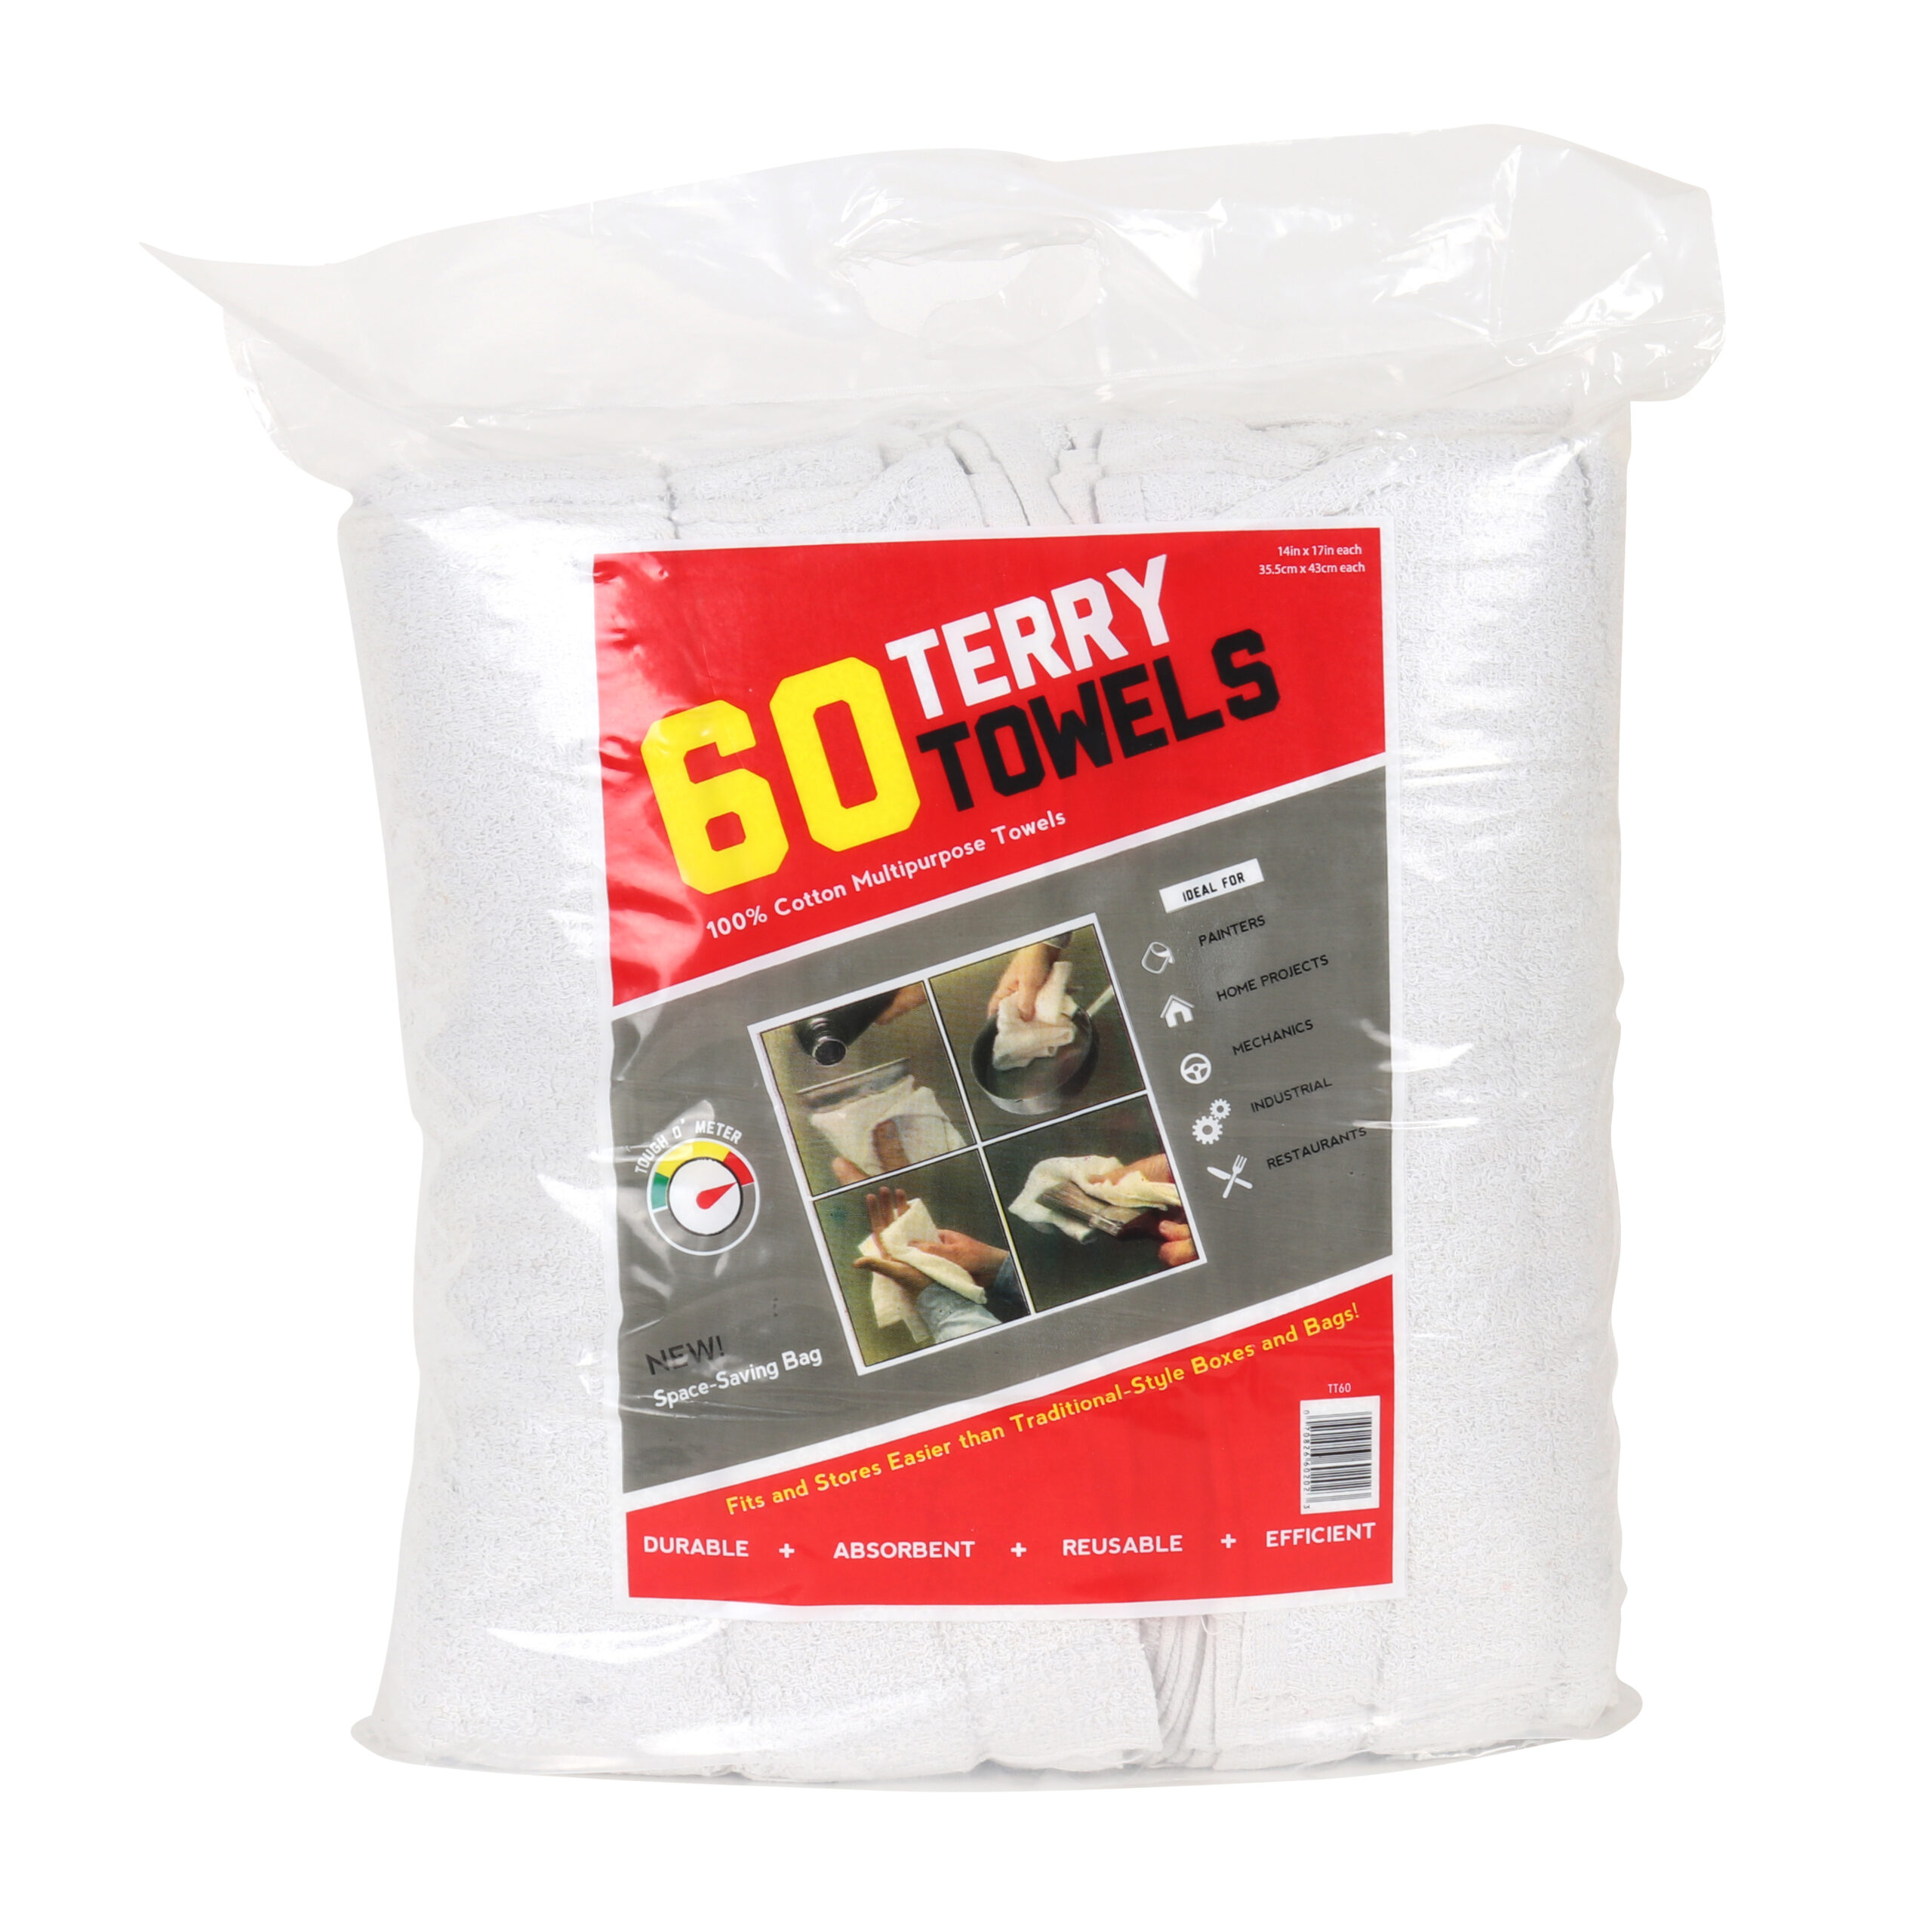  Arkwright W11 Terry Cleaning Rags Bulk - (Pallet of